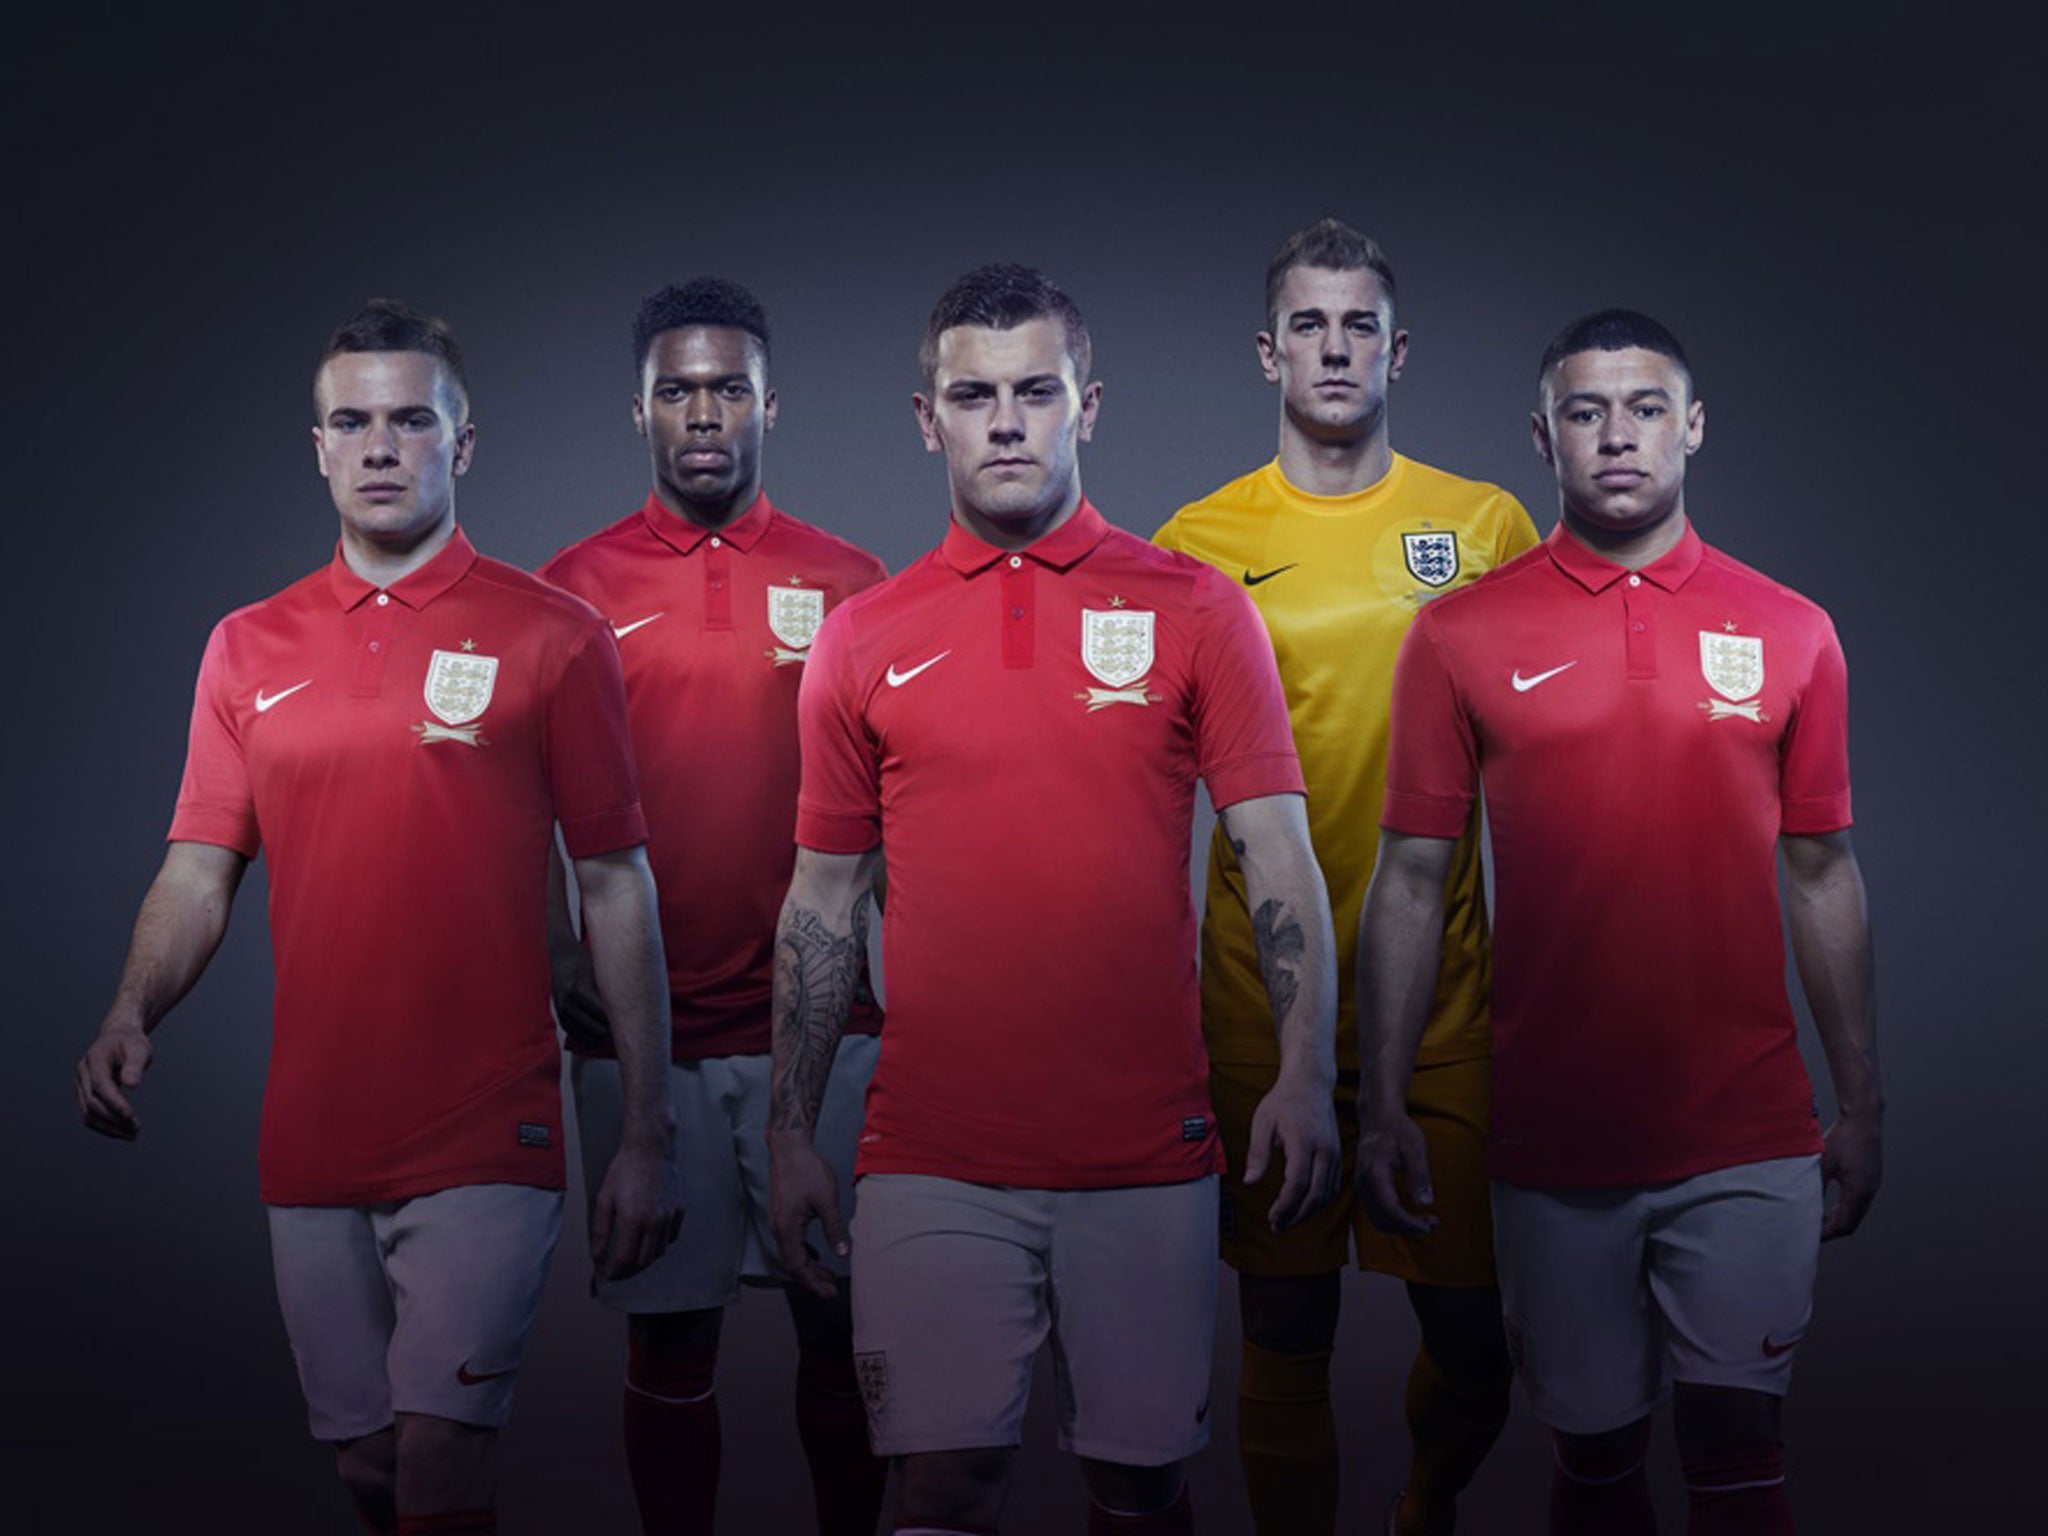 England's promotional photos for the new away kit focus on the younger players rather than the old guard